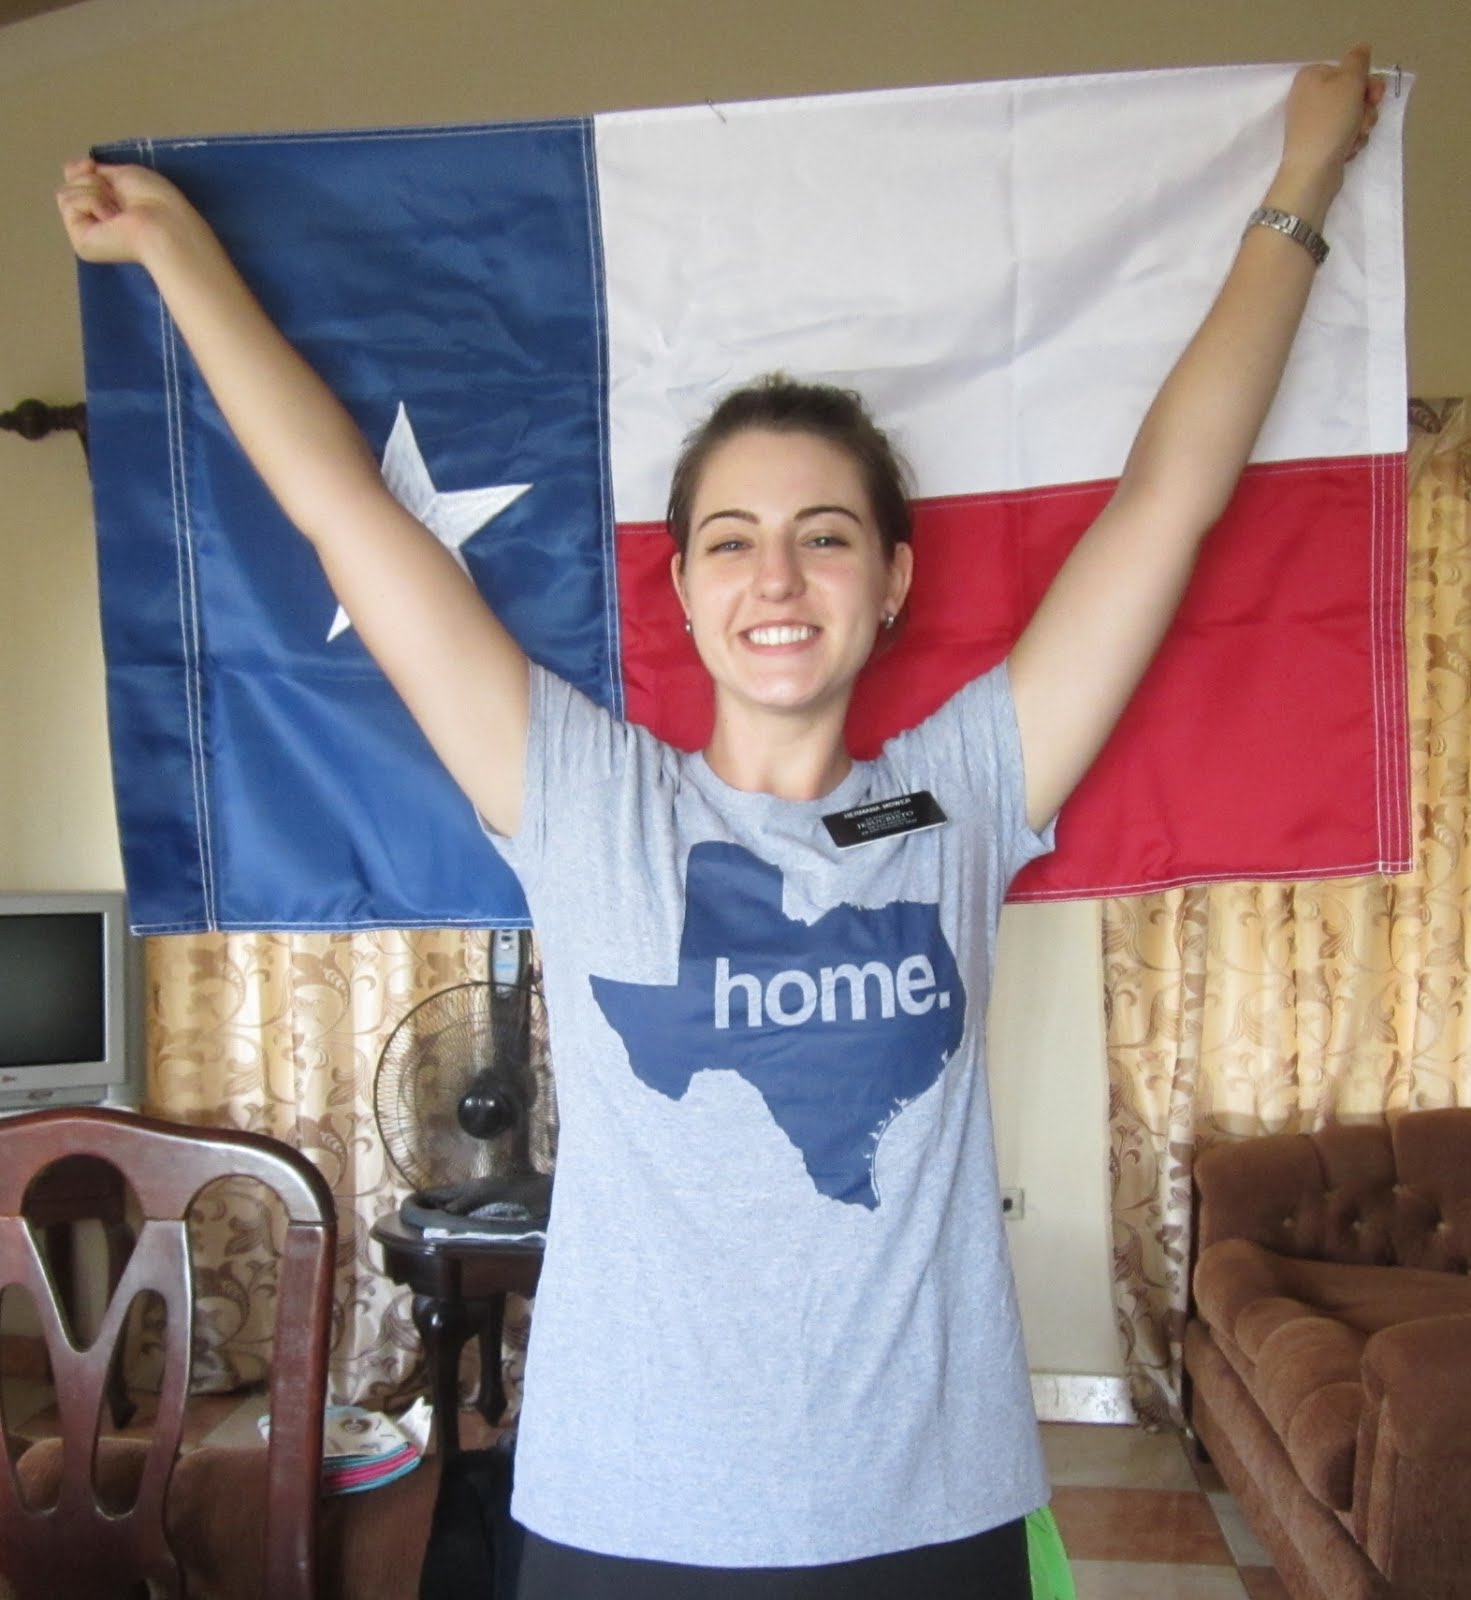 Love from HOME!  YAY TEXAS!